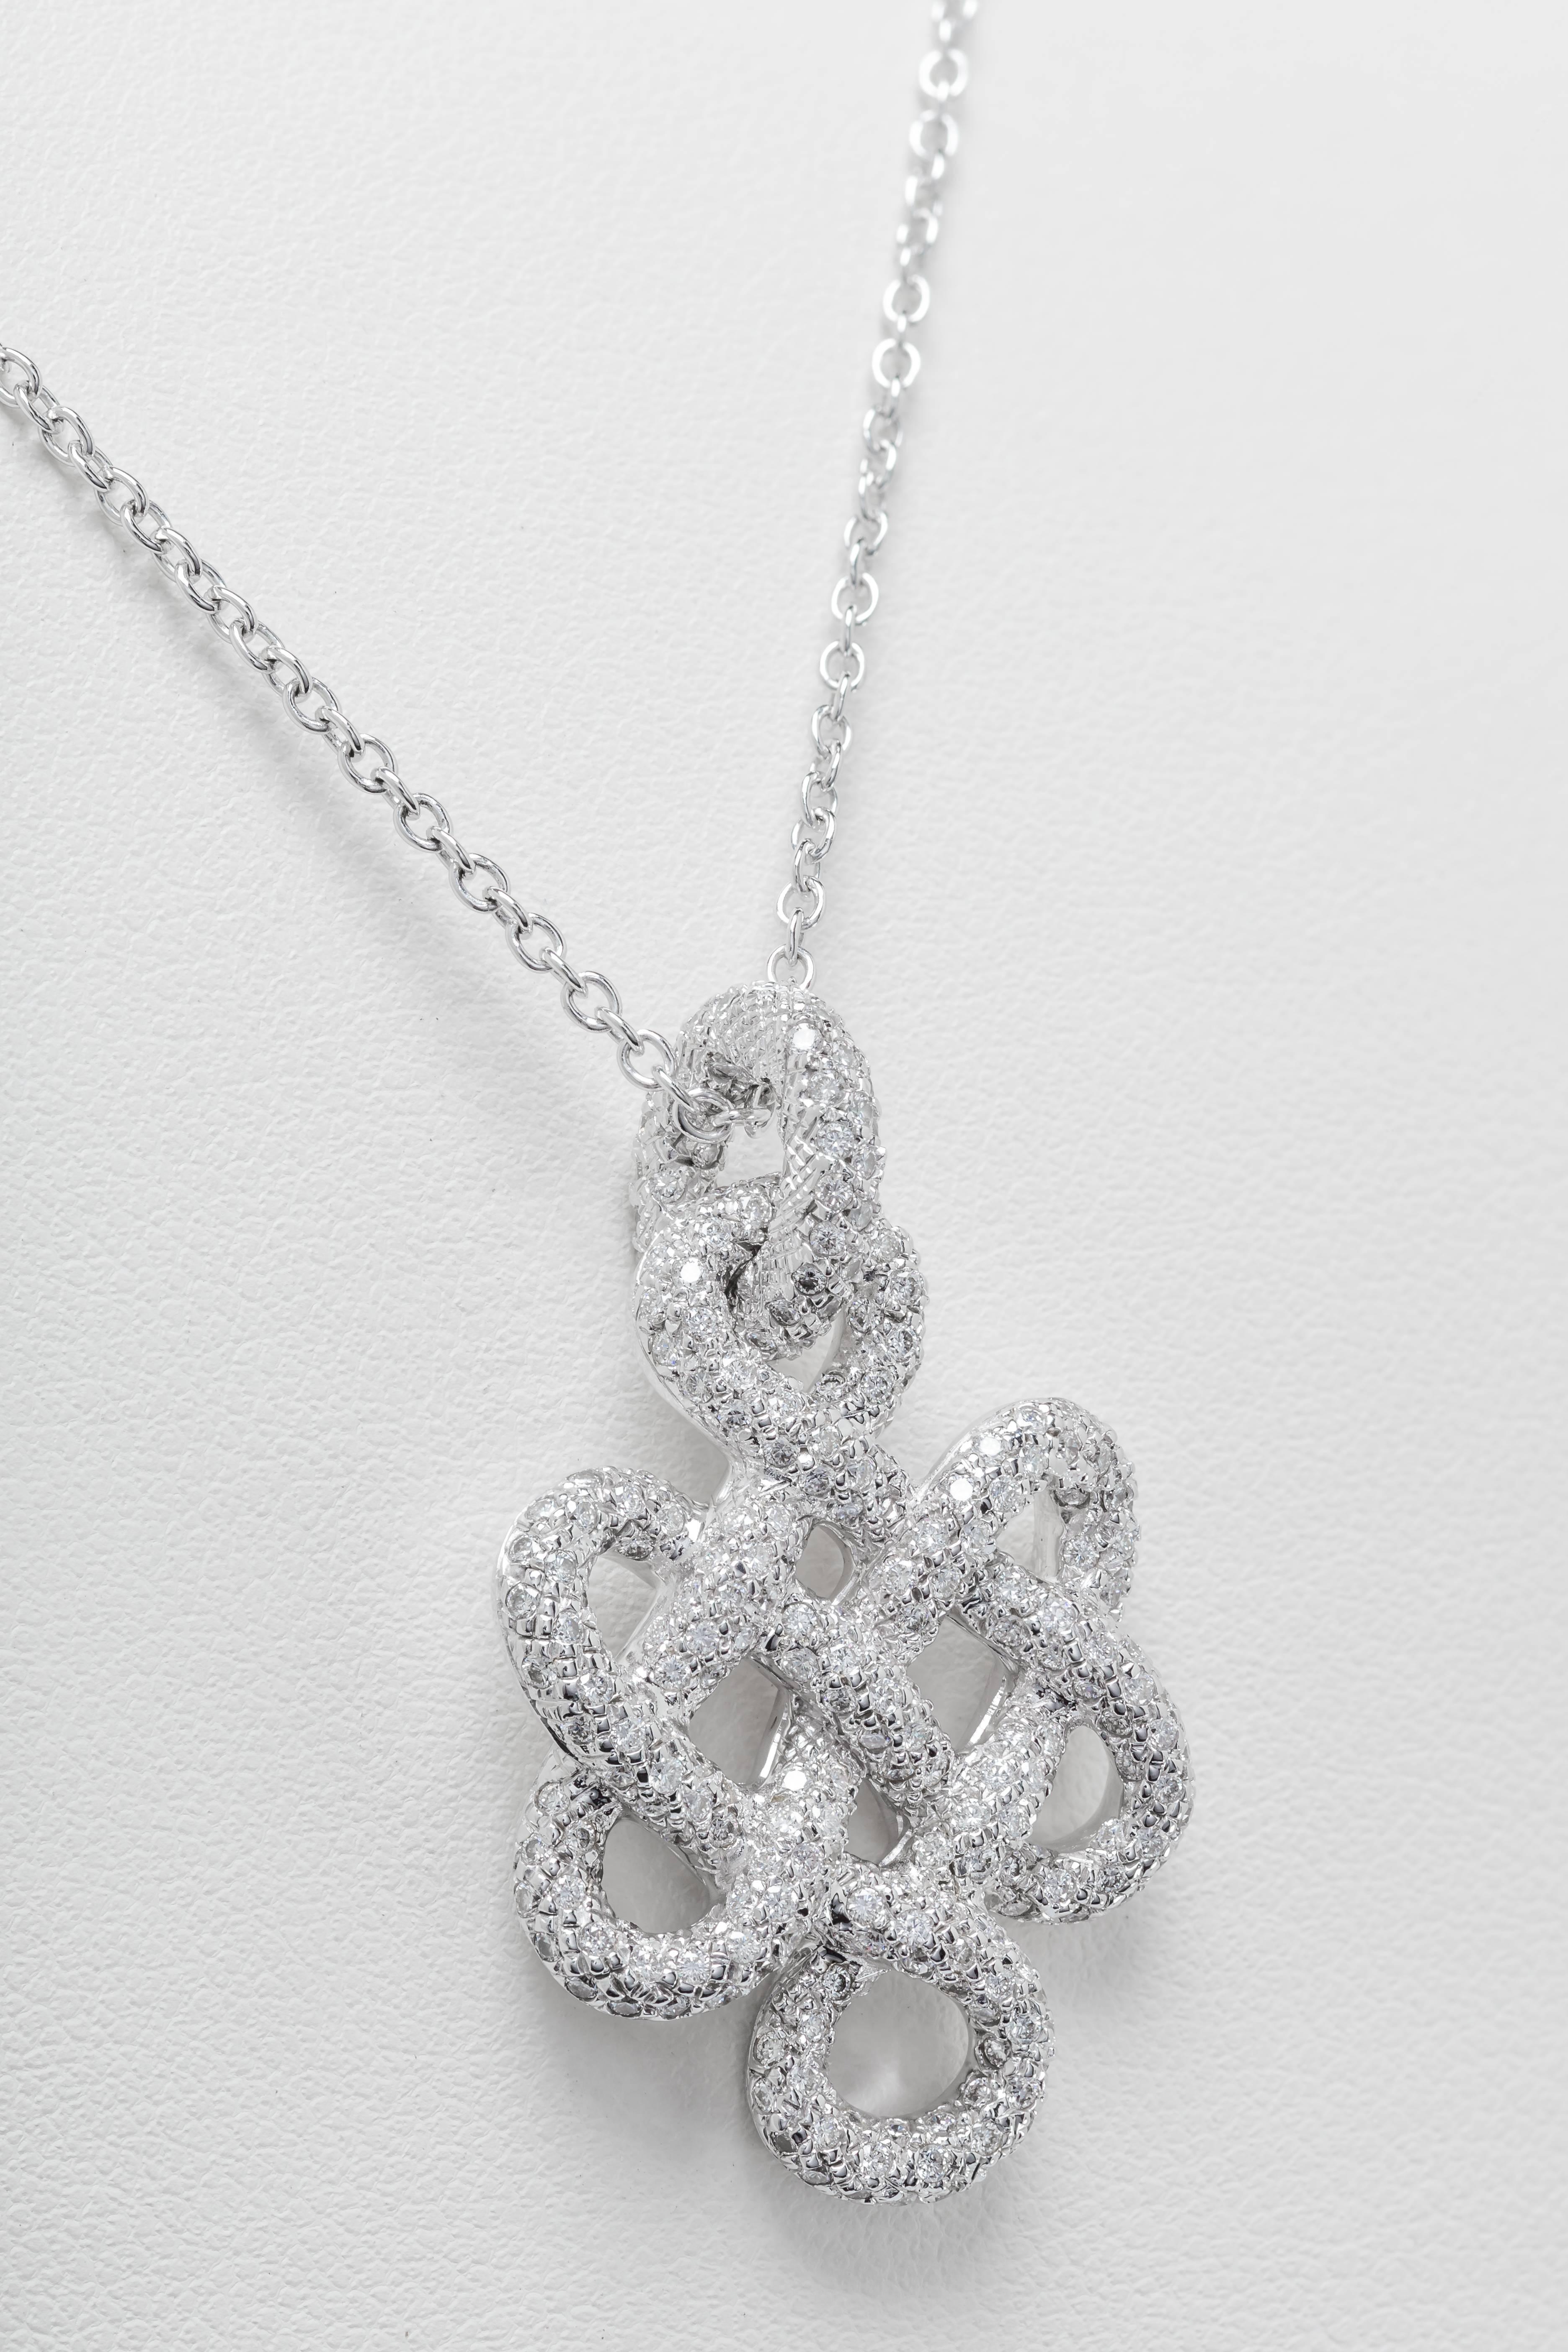 This new H. Stern Diane von Furstenberg necklace features a pendant with diamonds totaling 1.57ct set in 18k white gold.  The pendant is set on an 18" 18k white gold chain.  The pendant measures 35mm tall and 22mm wide.